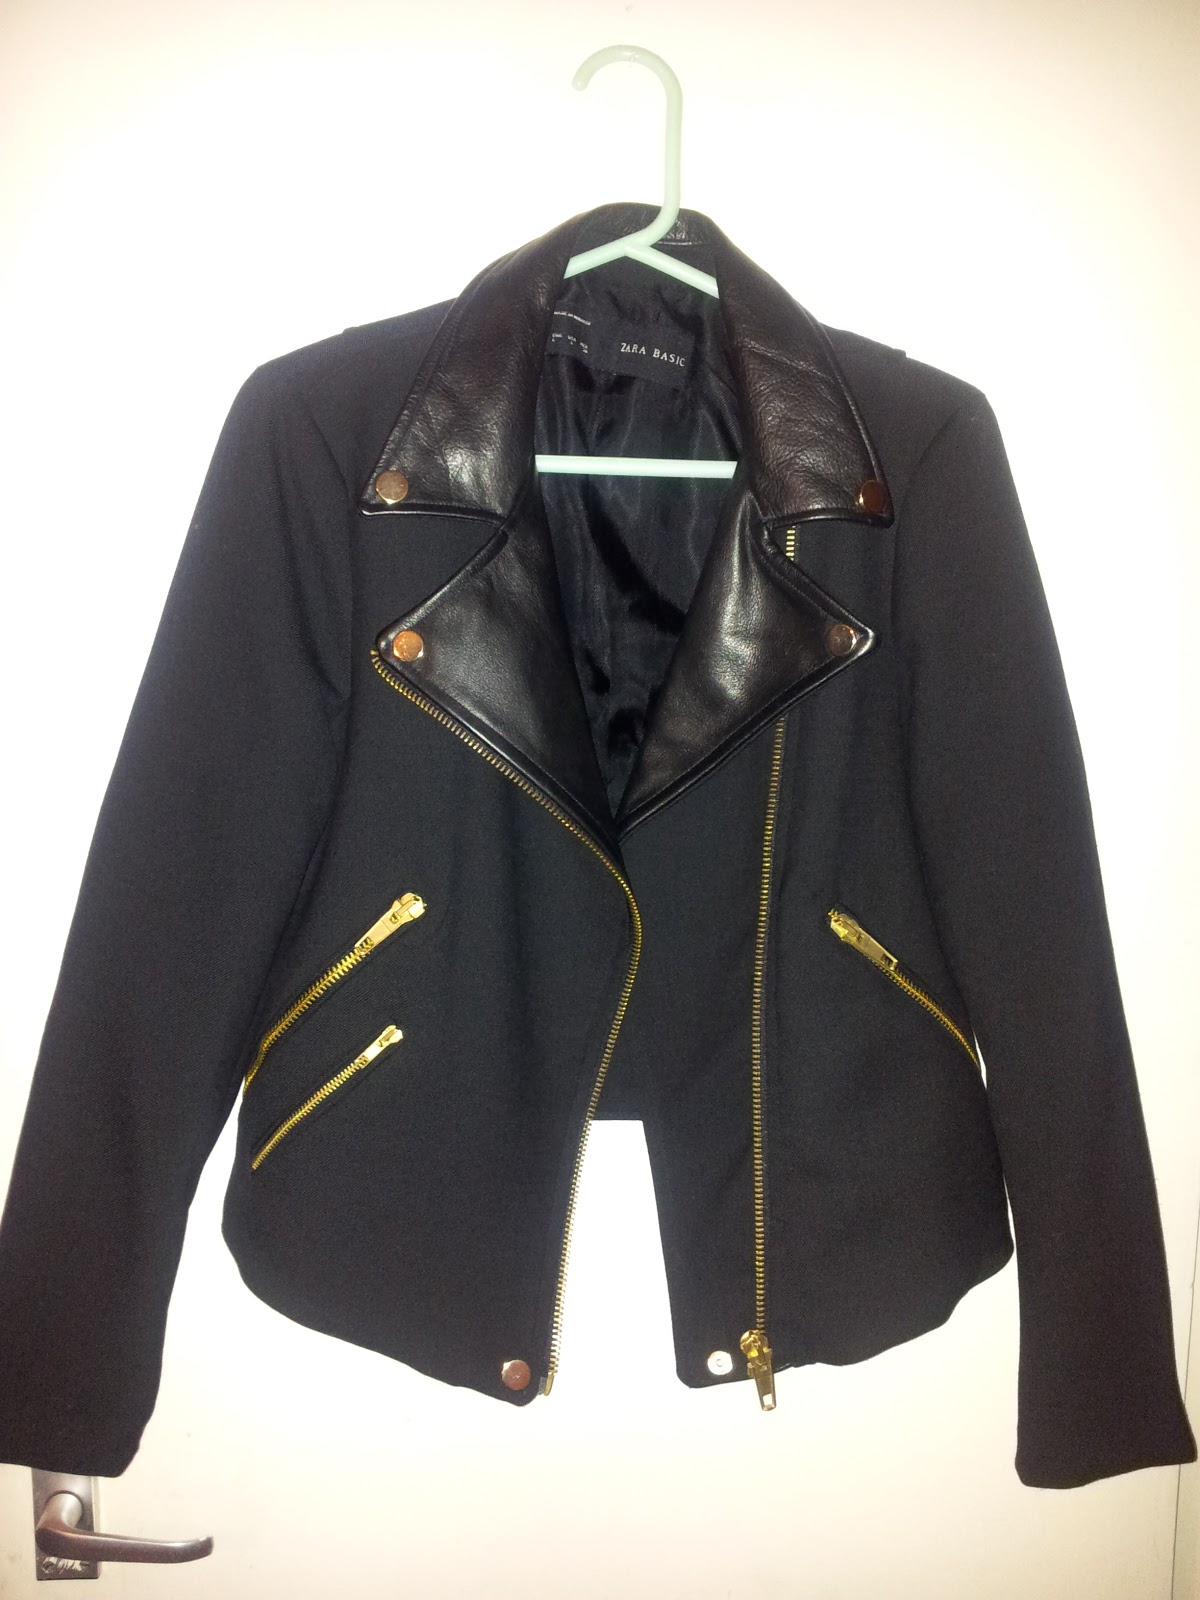 Crossover Jacket with Leather Lapels - Zara, Â£79.99